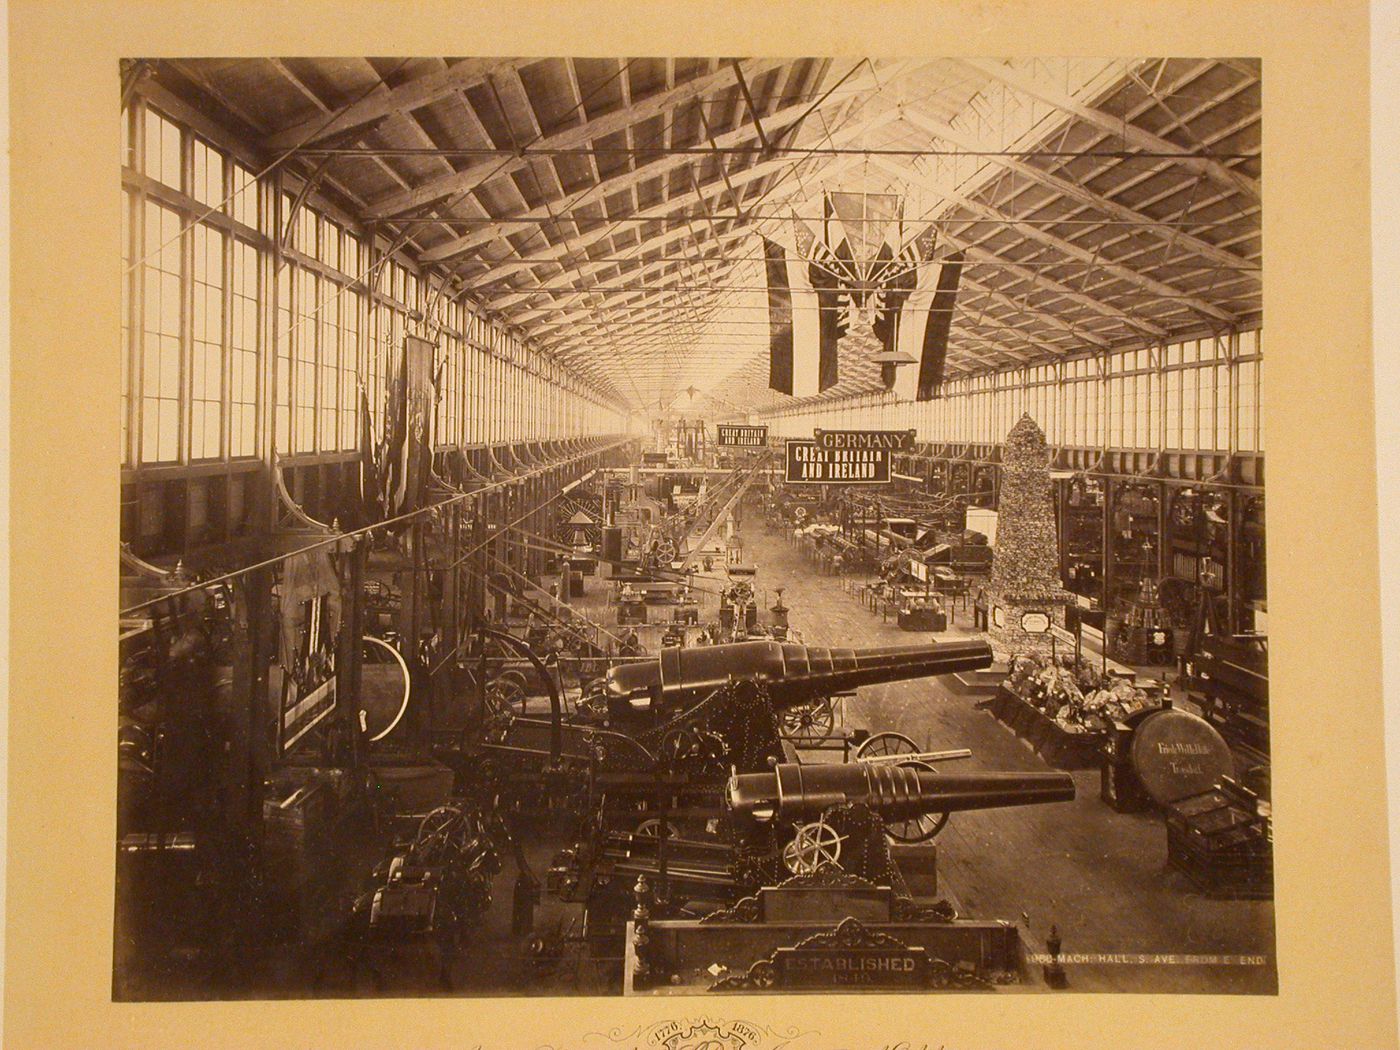 Centennial Exposition Philadelphia: Machine Hall, South Avenue from East End